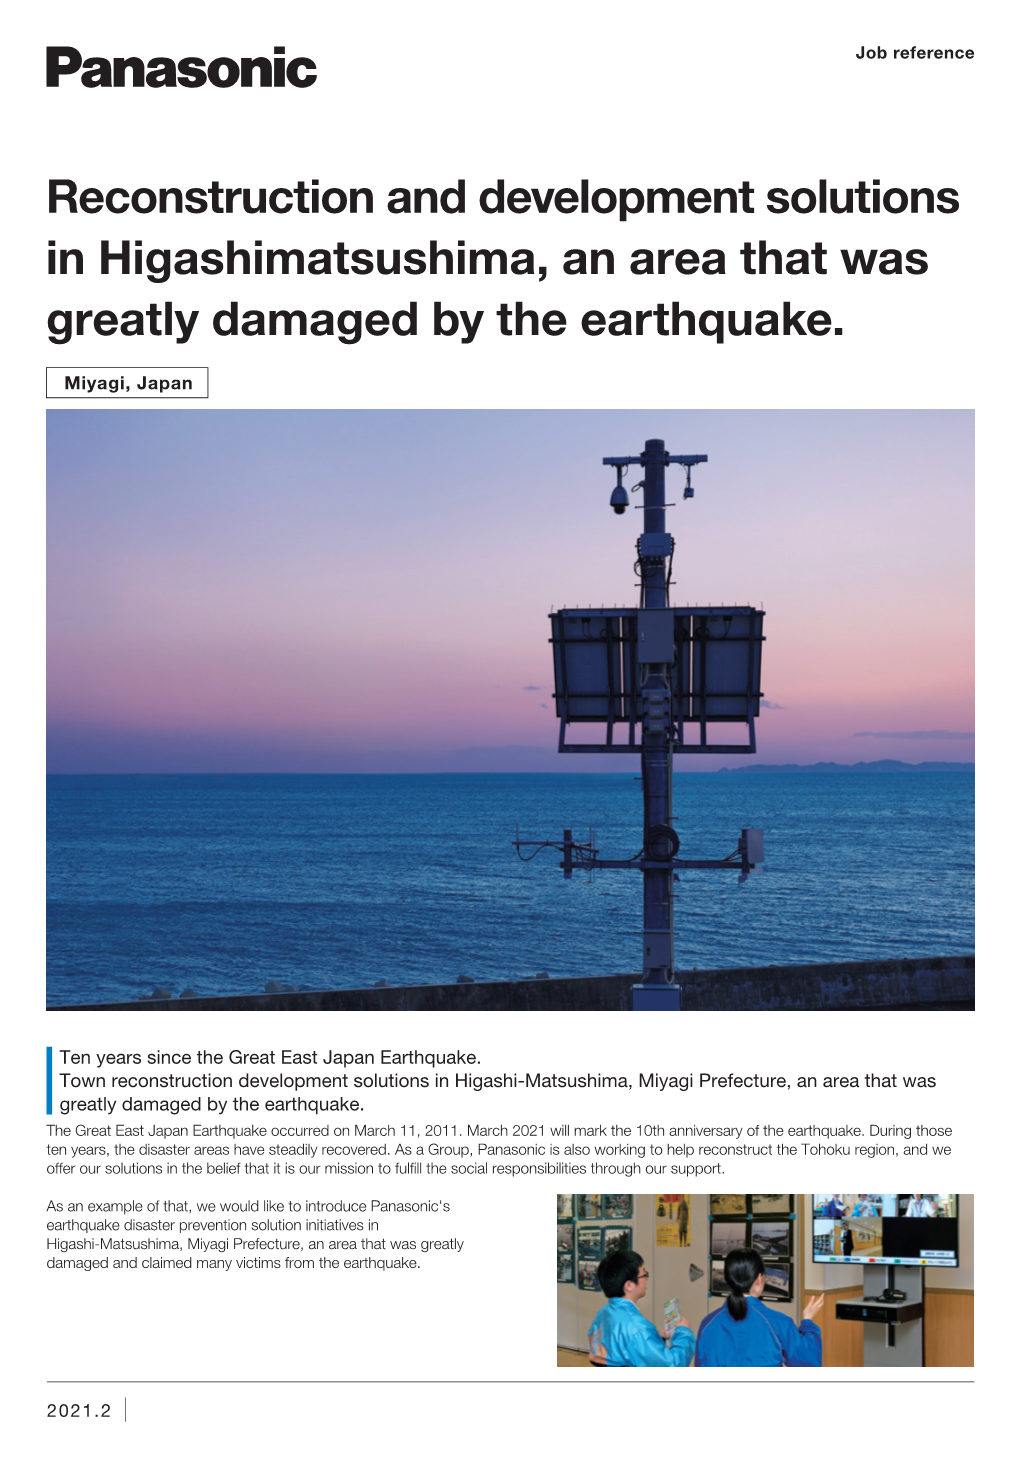 Reconstruction and Development Solutions in Higashimatsushima, an Area That Was Greatly Damaged by the Earthquake